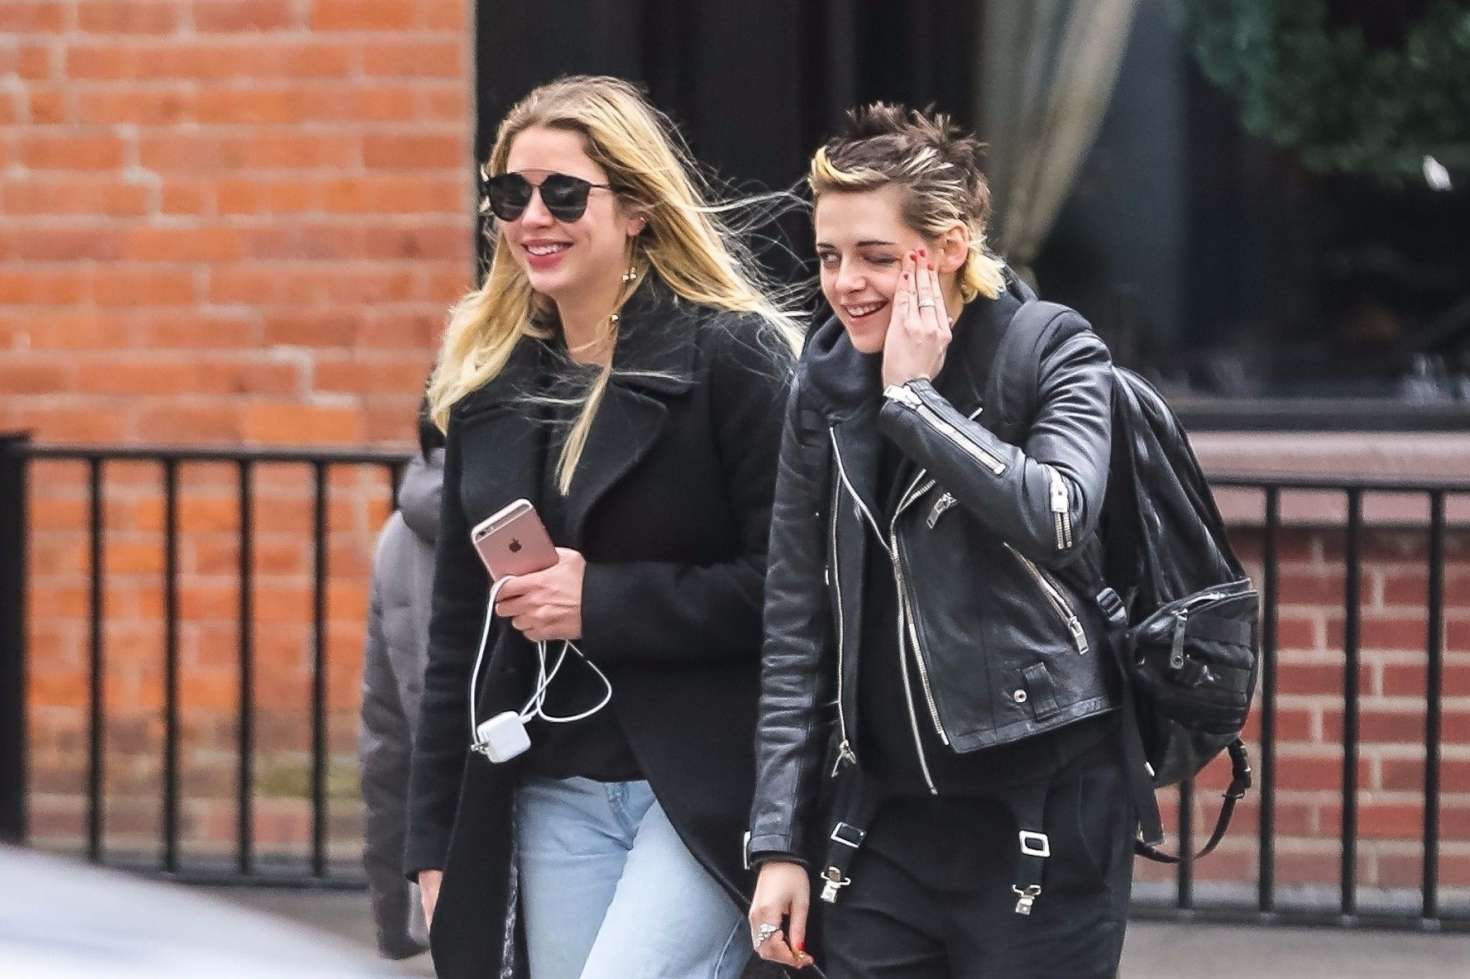 Ashley Benson and Kristen Stewart out together in NYC -09 | GotCeleb